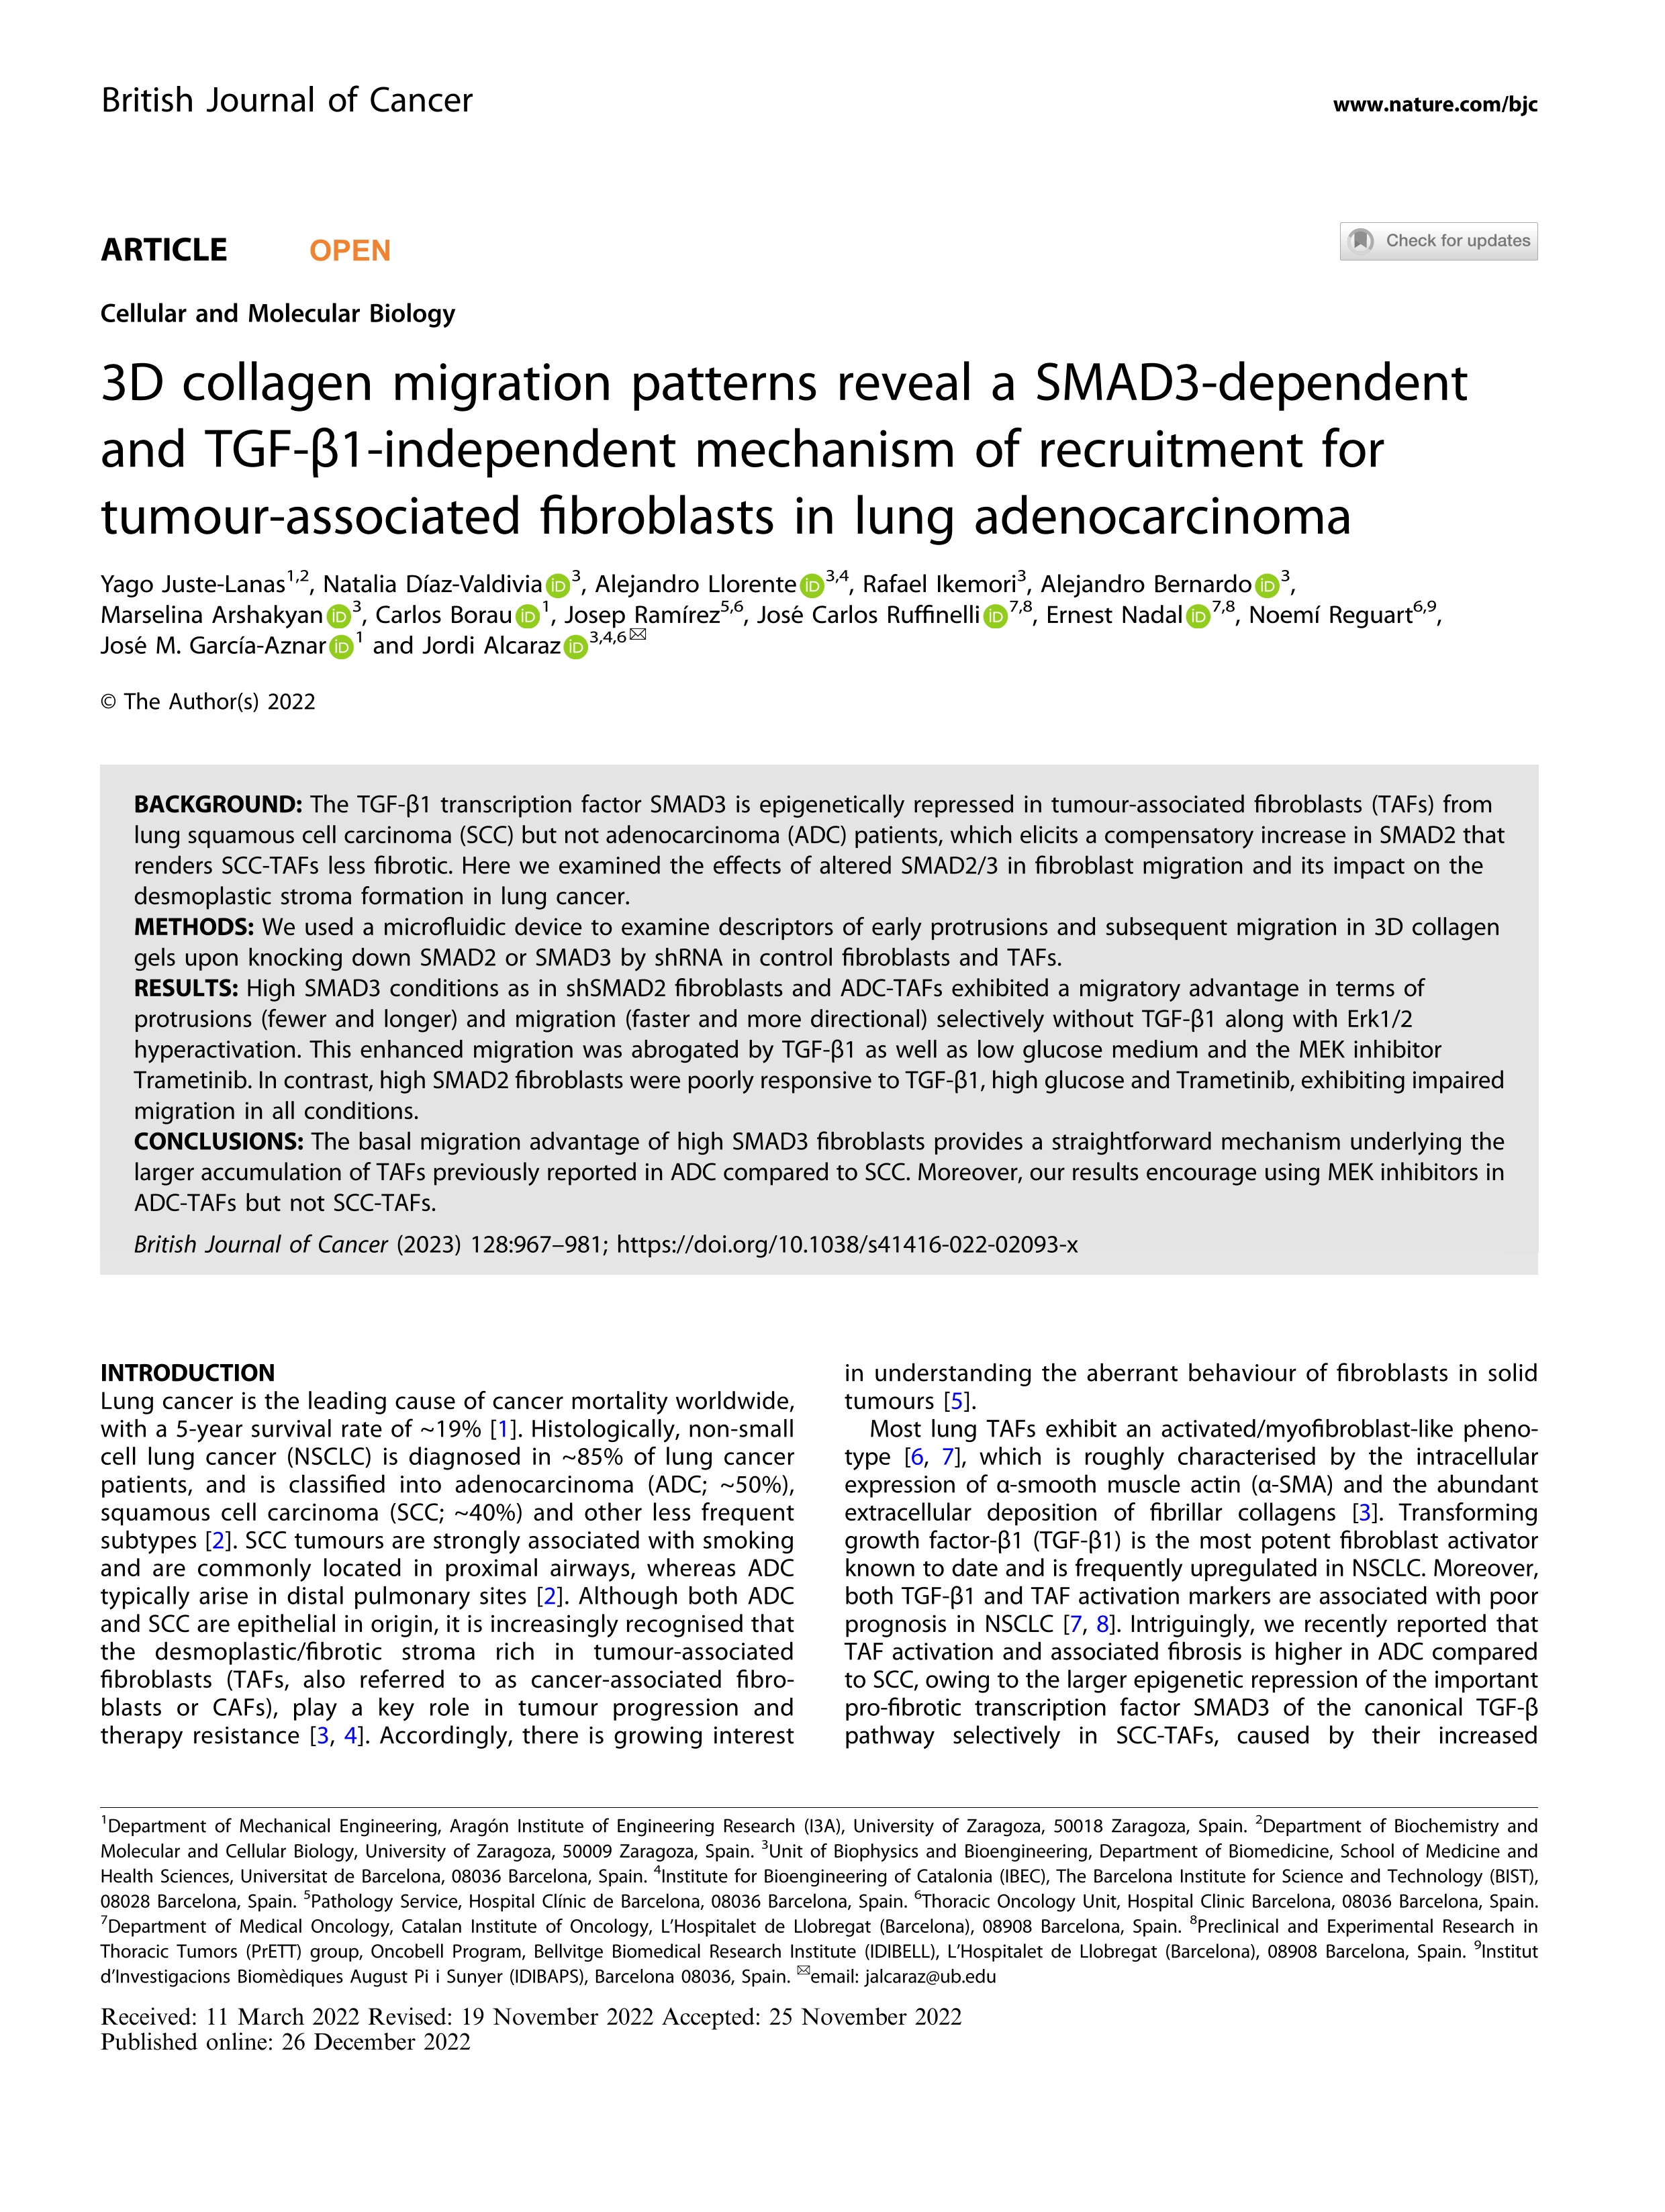 3D collagen migration patterns reveal a SMAD3-dependent and TGF-ß1-independent mechanism of recruitment for tumour-associated fibroblasts in lung adenocarcinoma